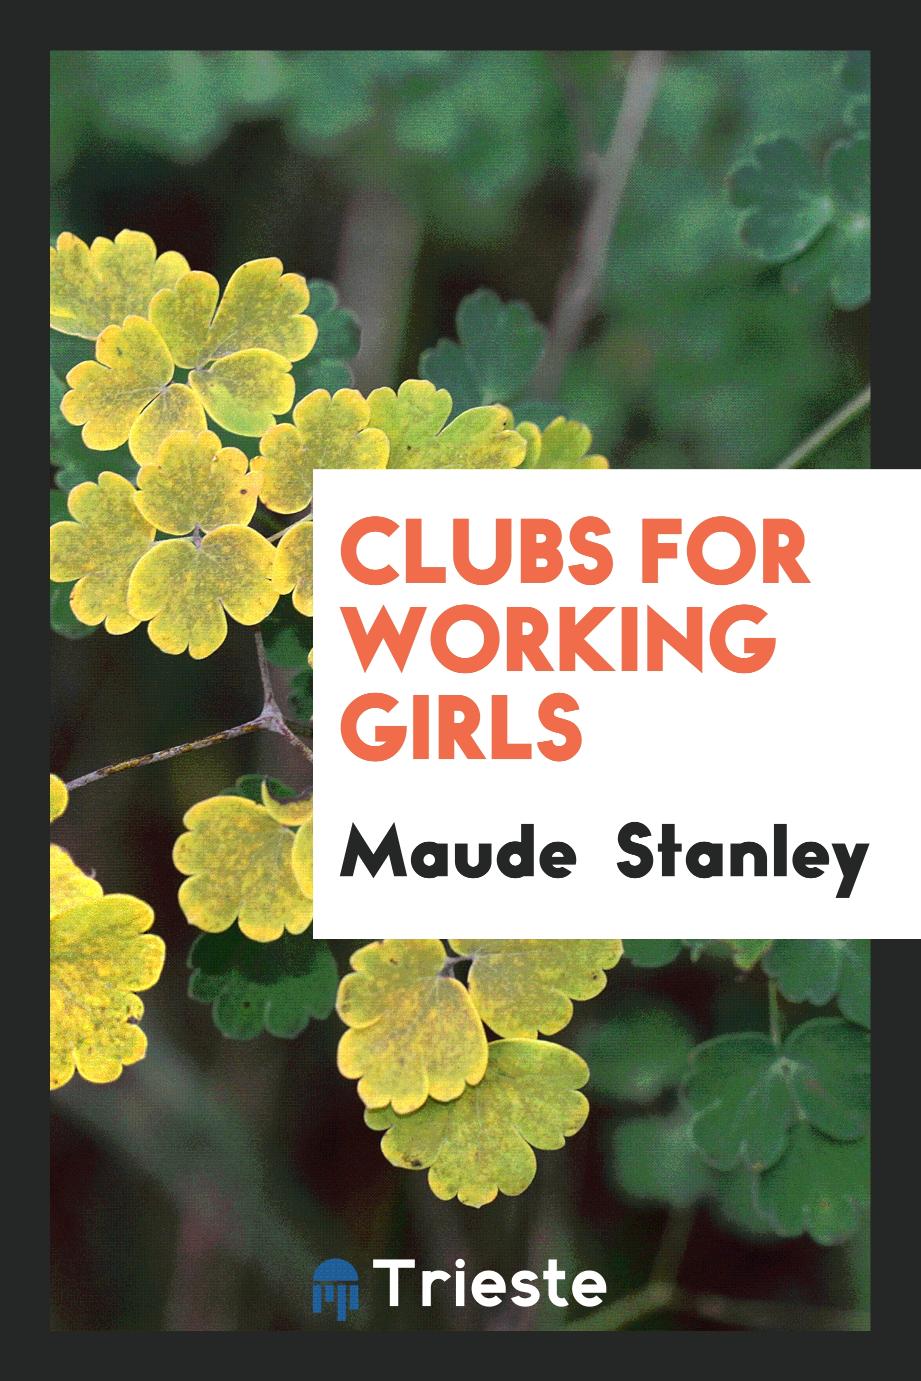 Clubs for working girls